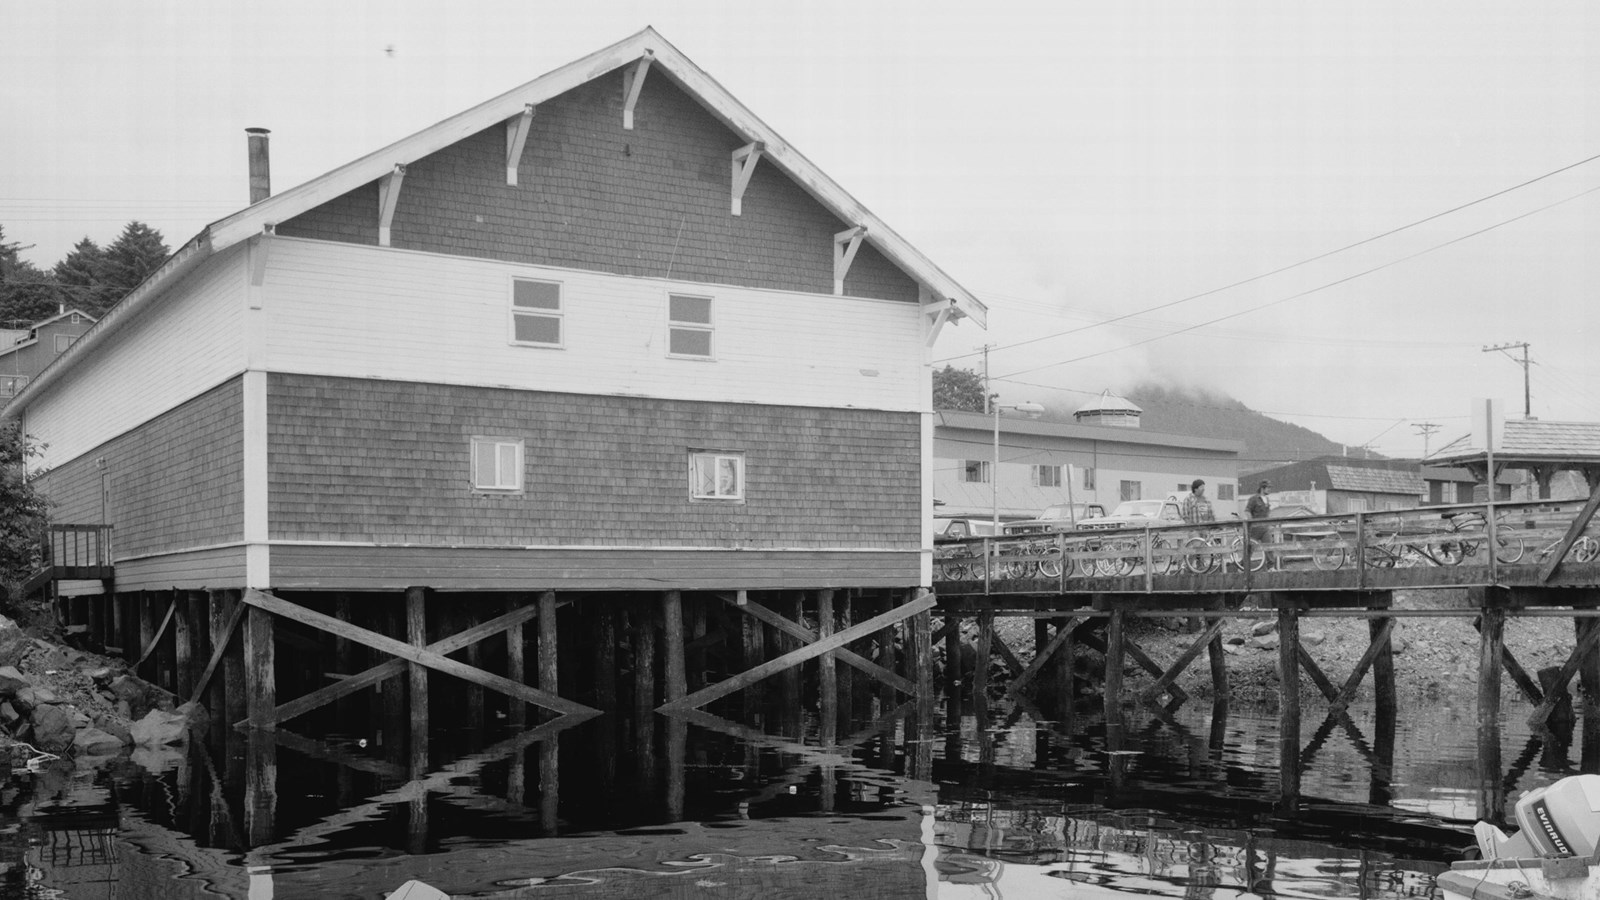 Black and white photo of a two story building on wood pilings over water.